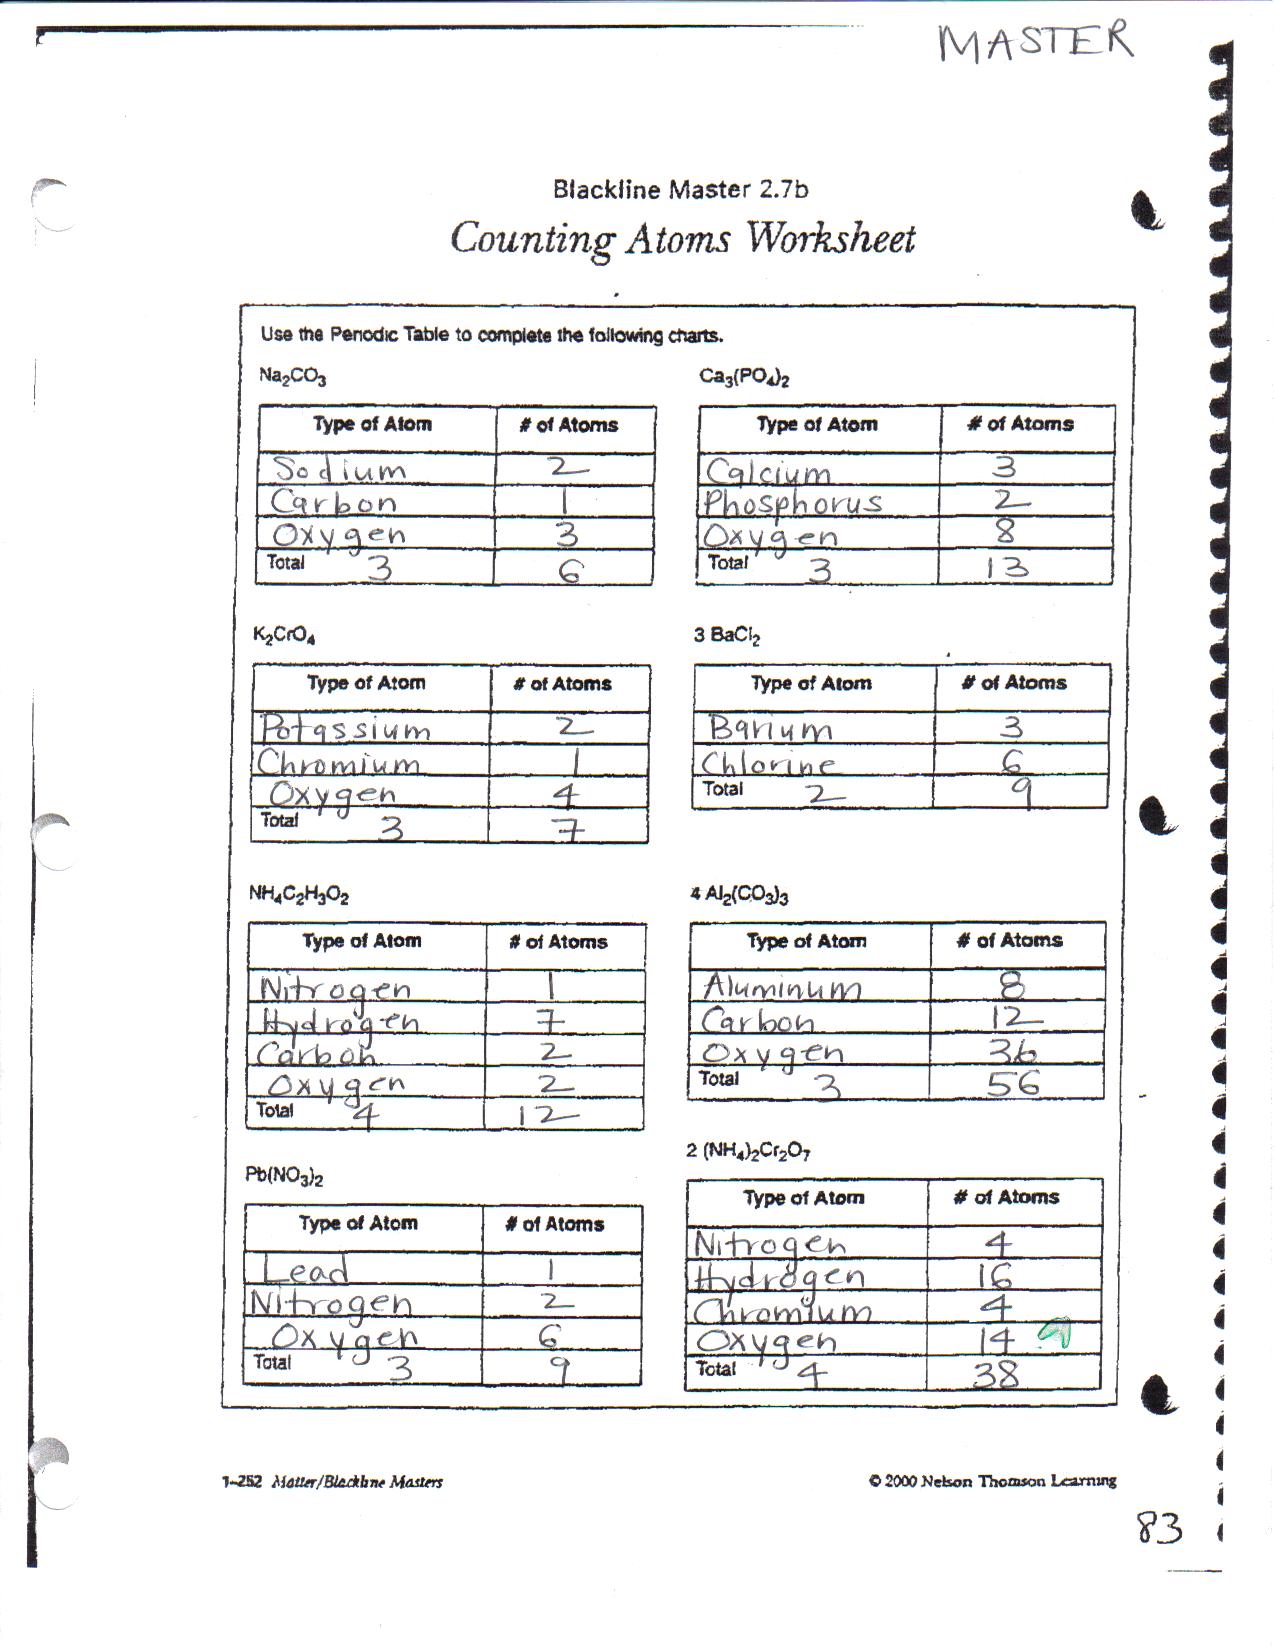 counting-atoms-worksheet-answers-8th-grade-tutore-org-master-of-documents